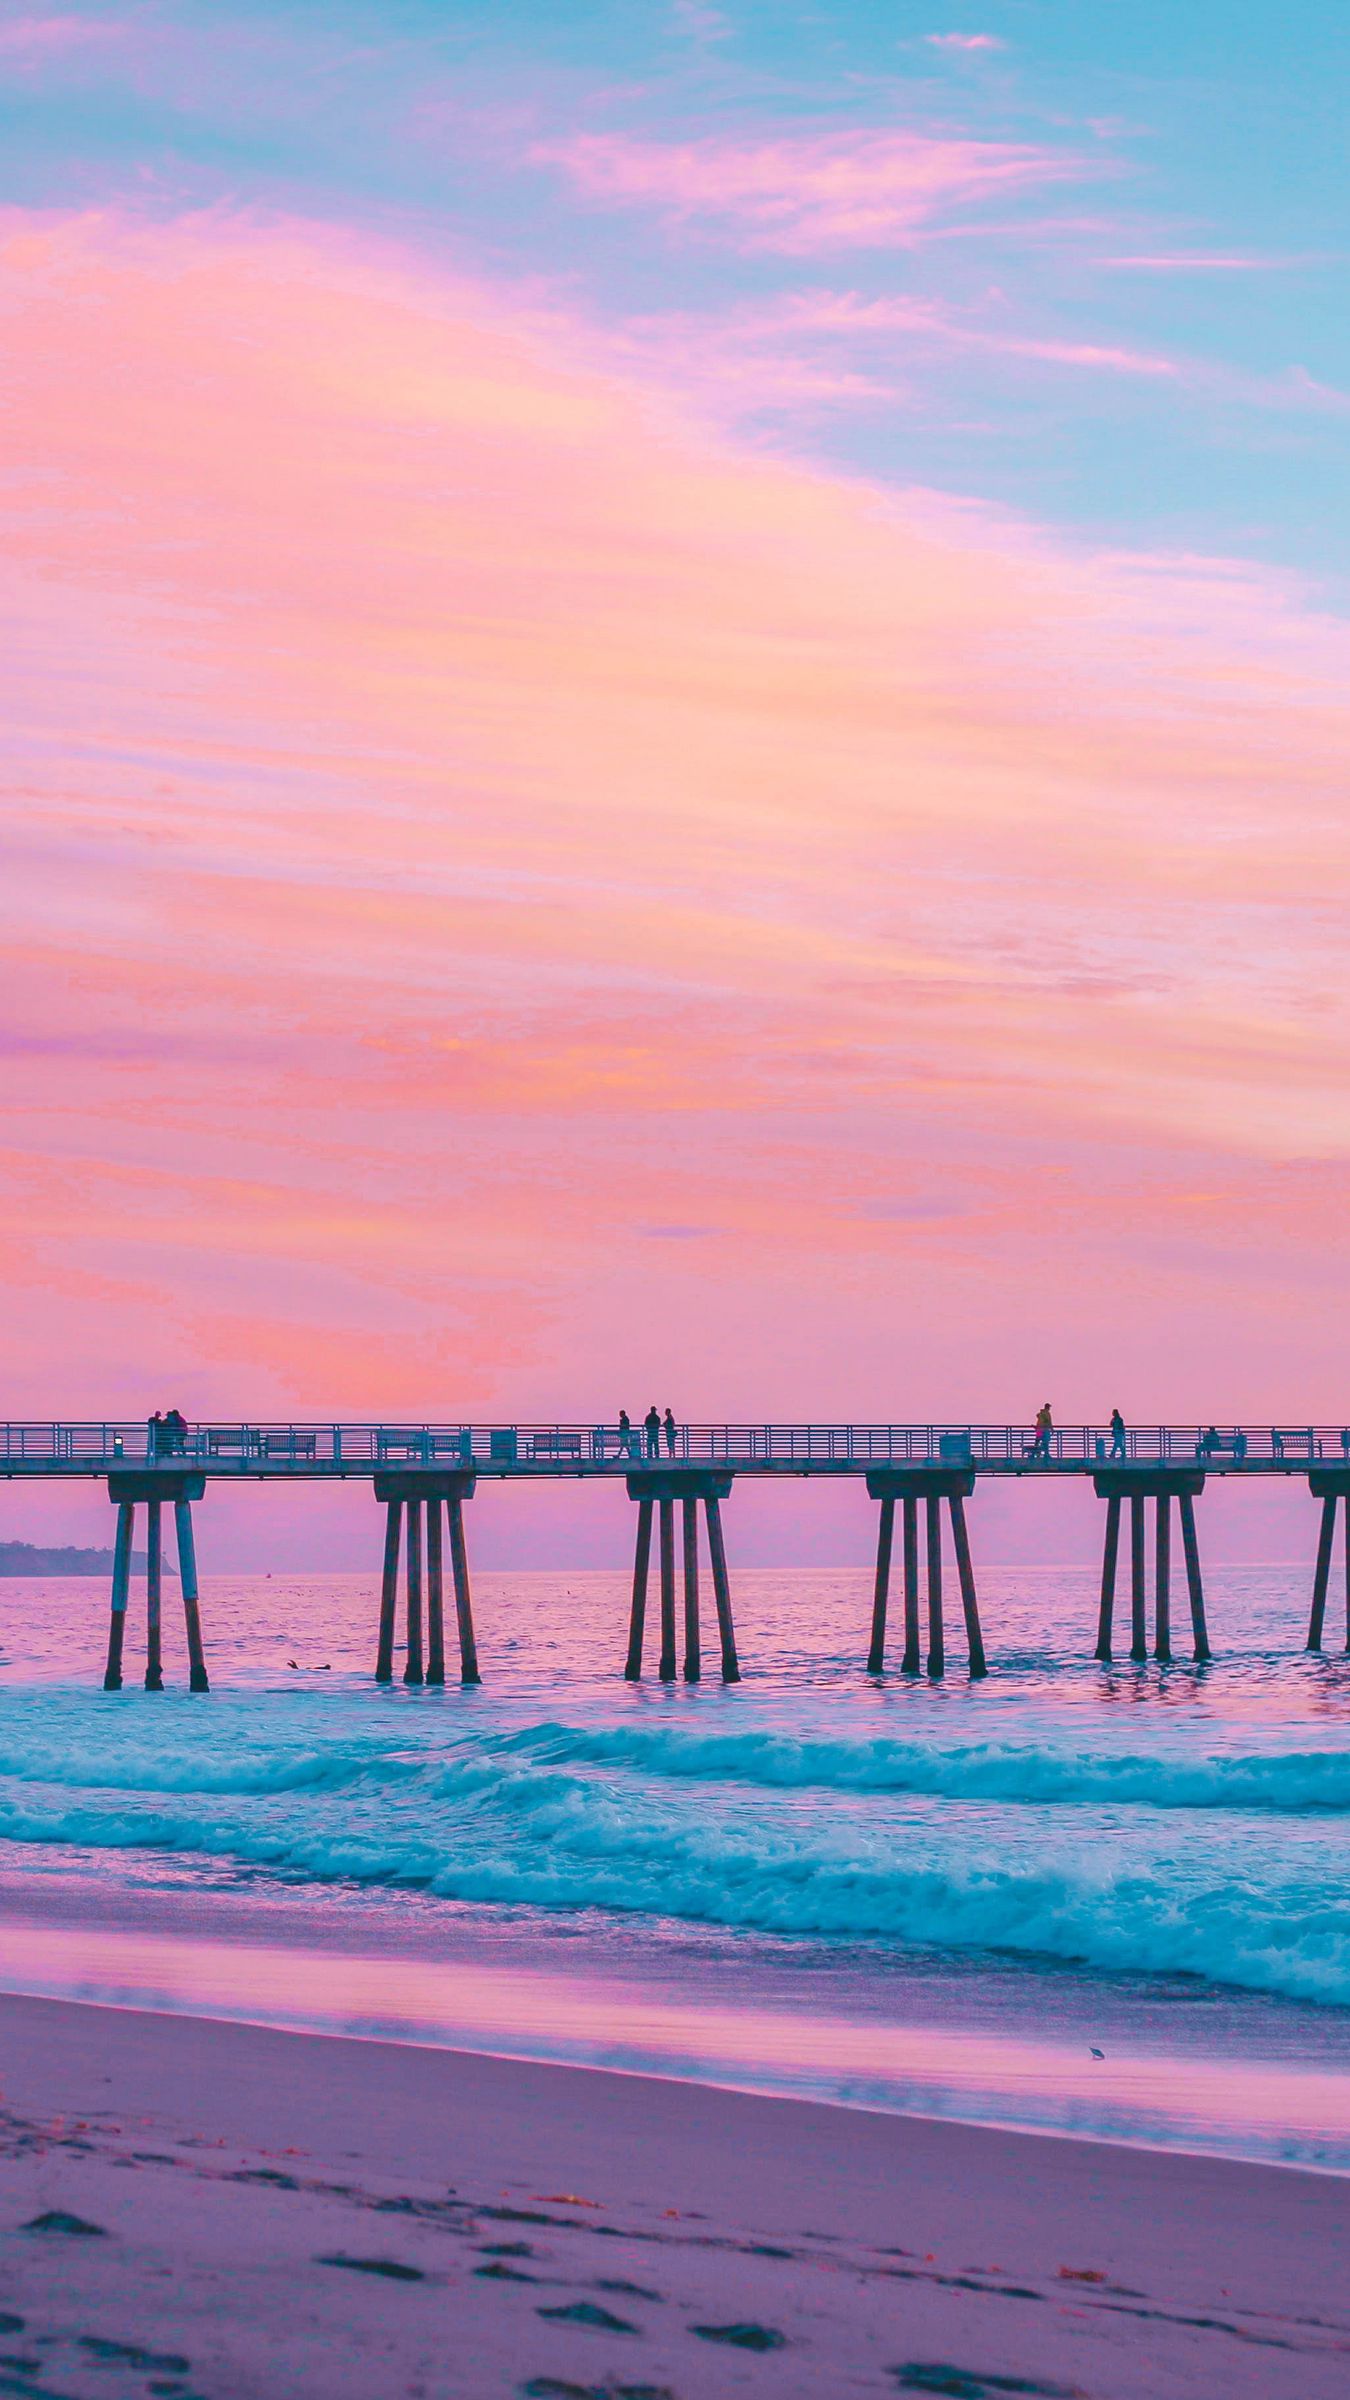 Download wallpaper 1350x2400 pier, sea, surf, pink, hermosa beach, california iphone 8+/7+/6s+/for parallax HD background